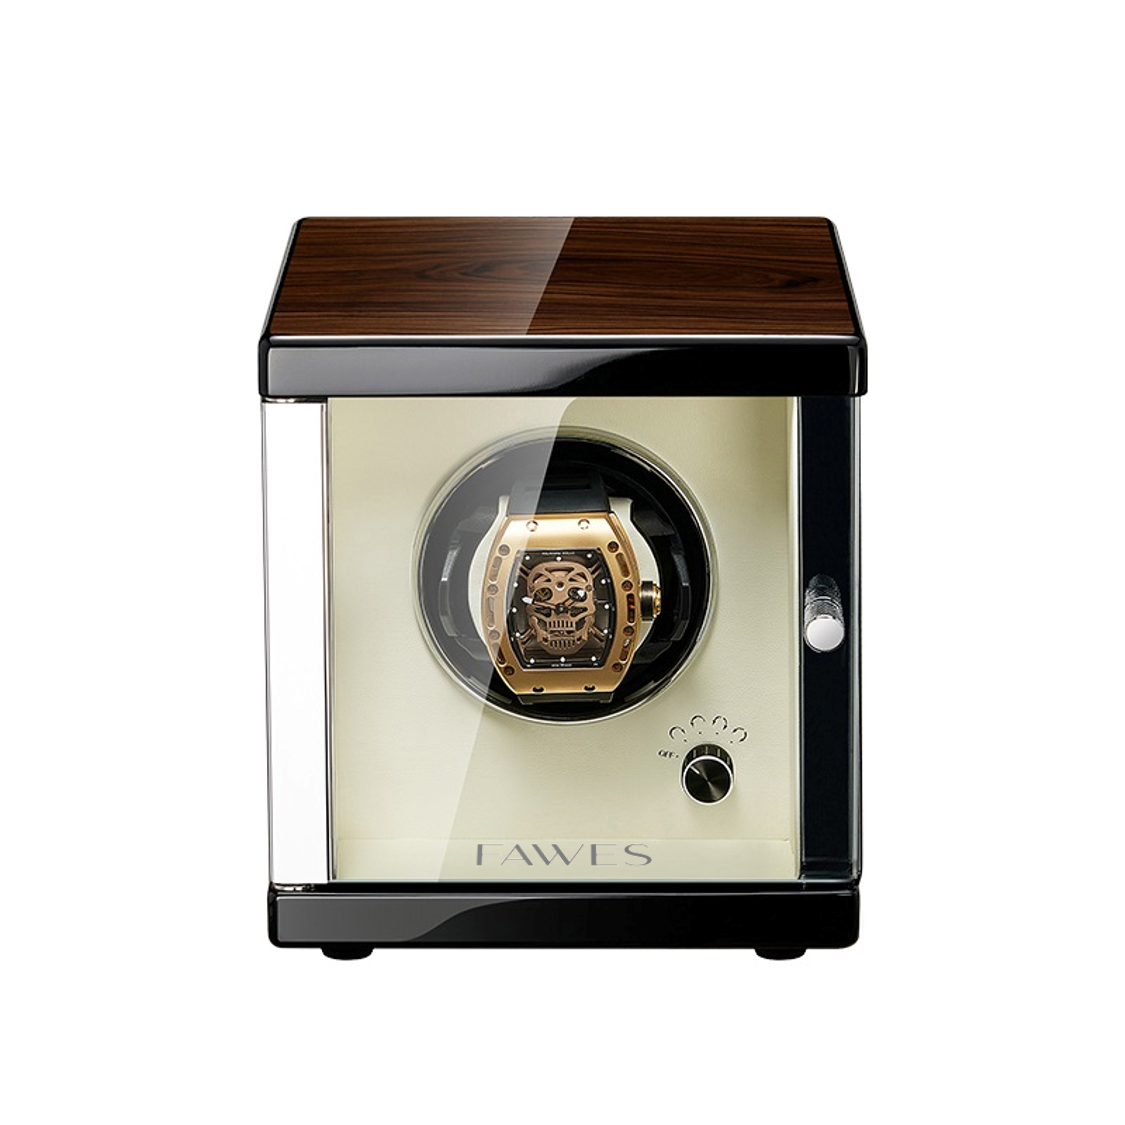 X31 Classic Automatic Watch Winder - 1 Epitope